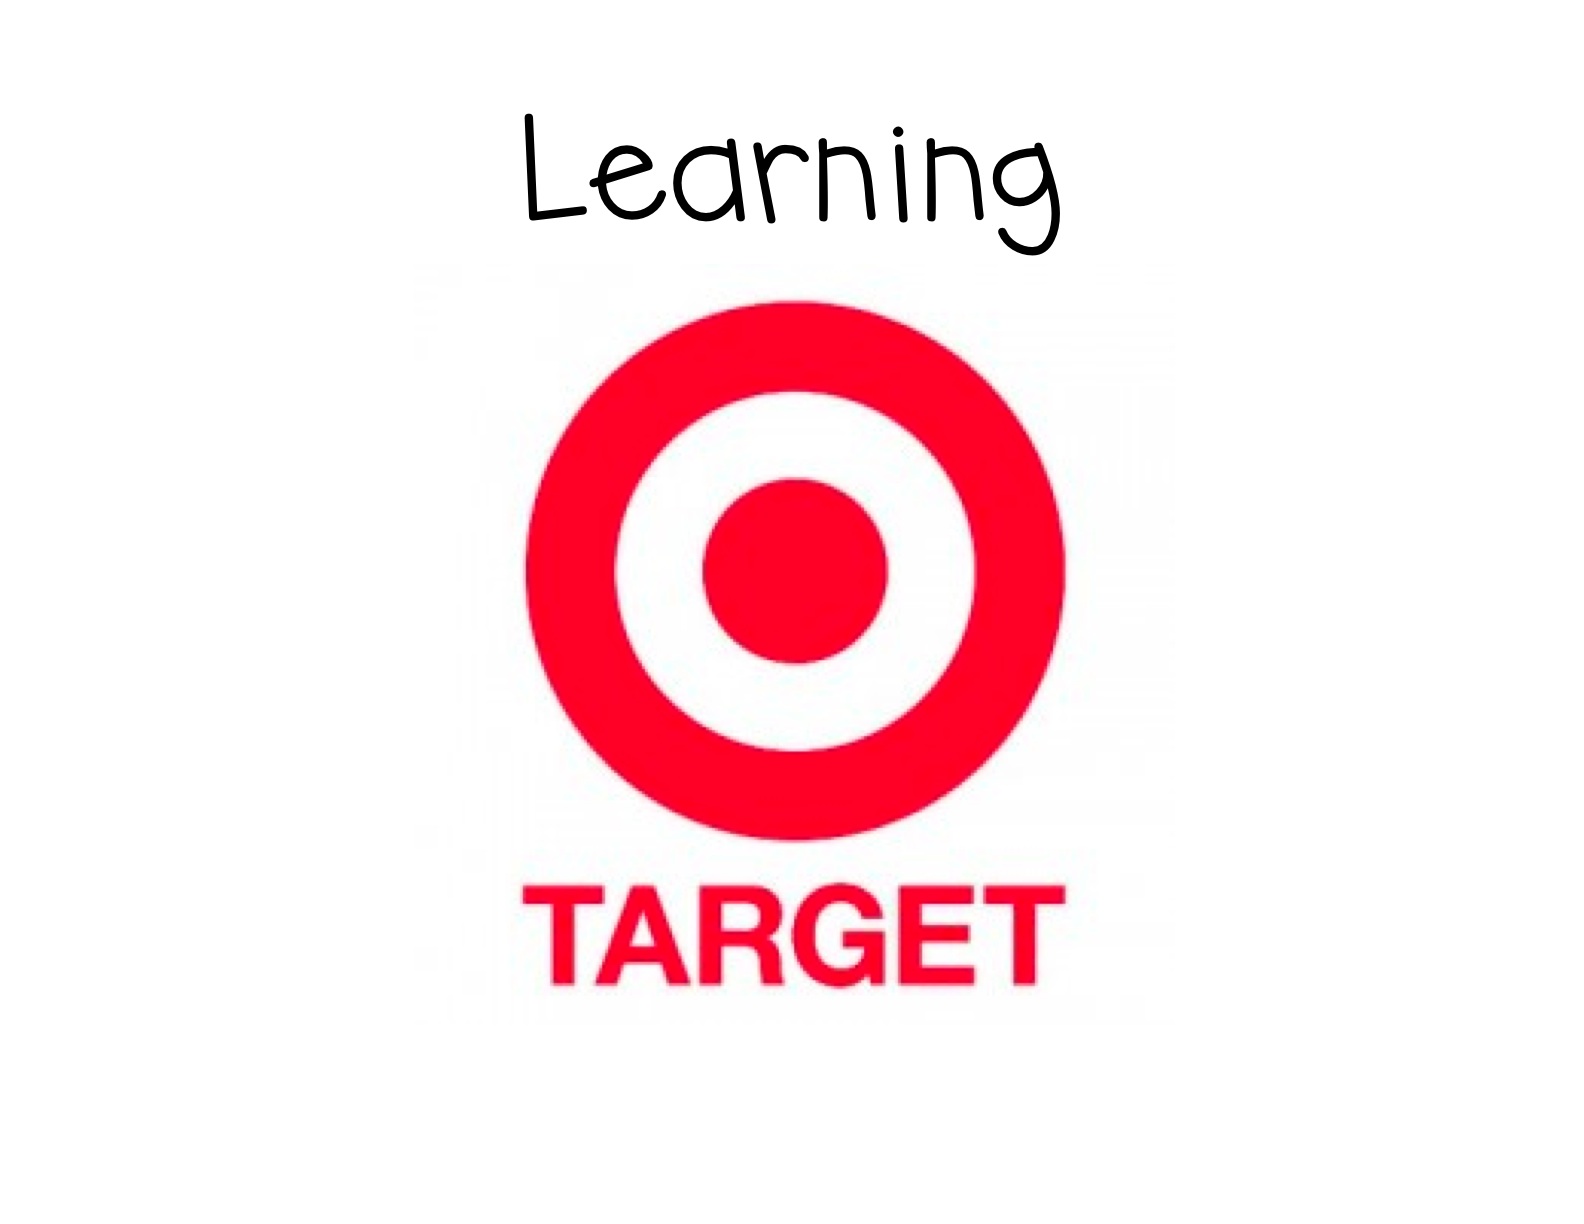 learning target clipart - photo #44